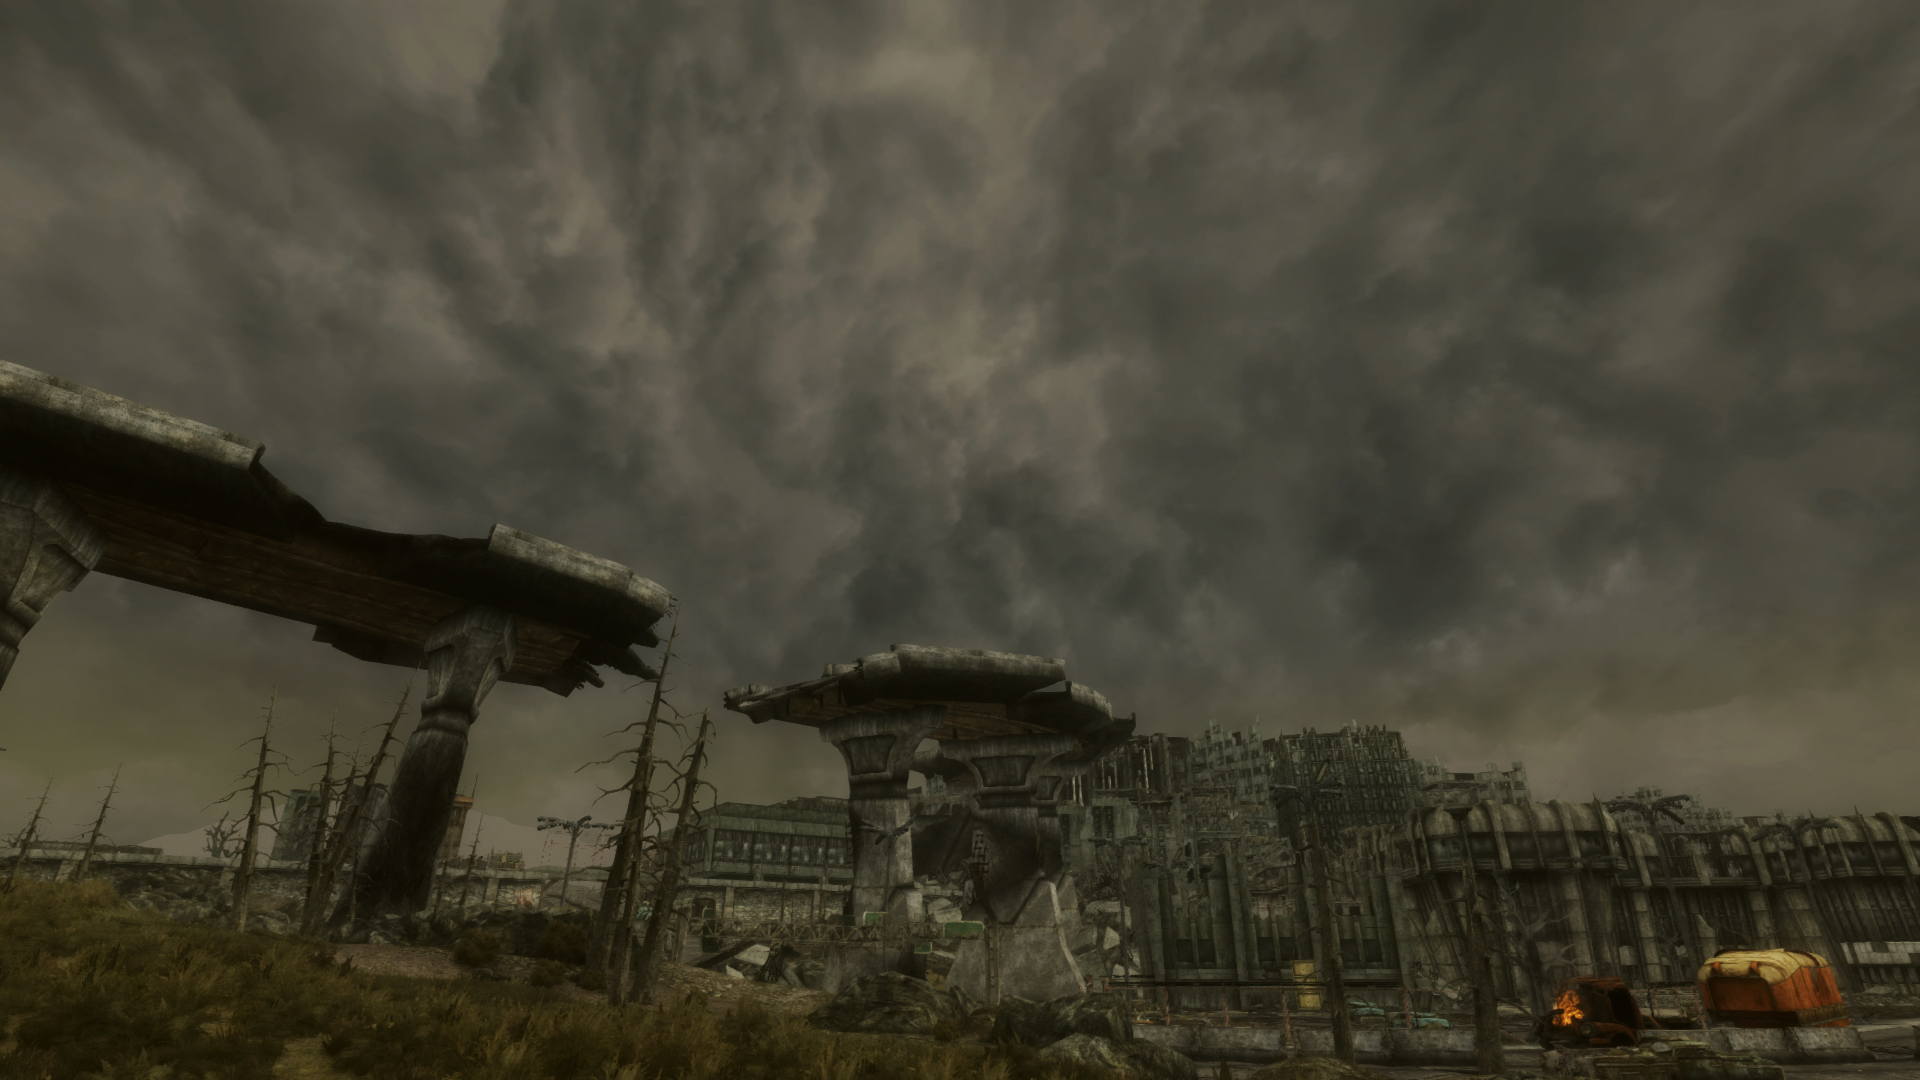 Dust fallout new. Fallout Dust Скриншоты. Фоллаут 3 куча пепла. Fallout 3 best weather Mod. Fallout Dust канализация.